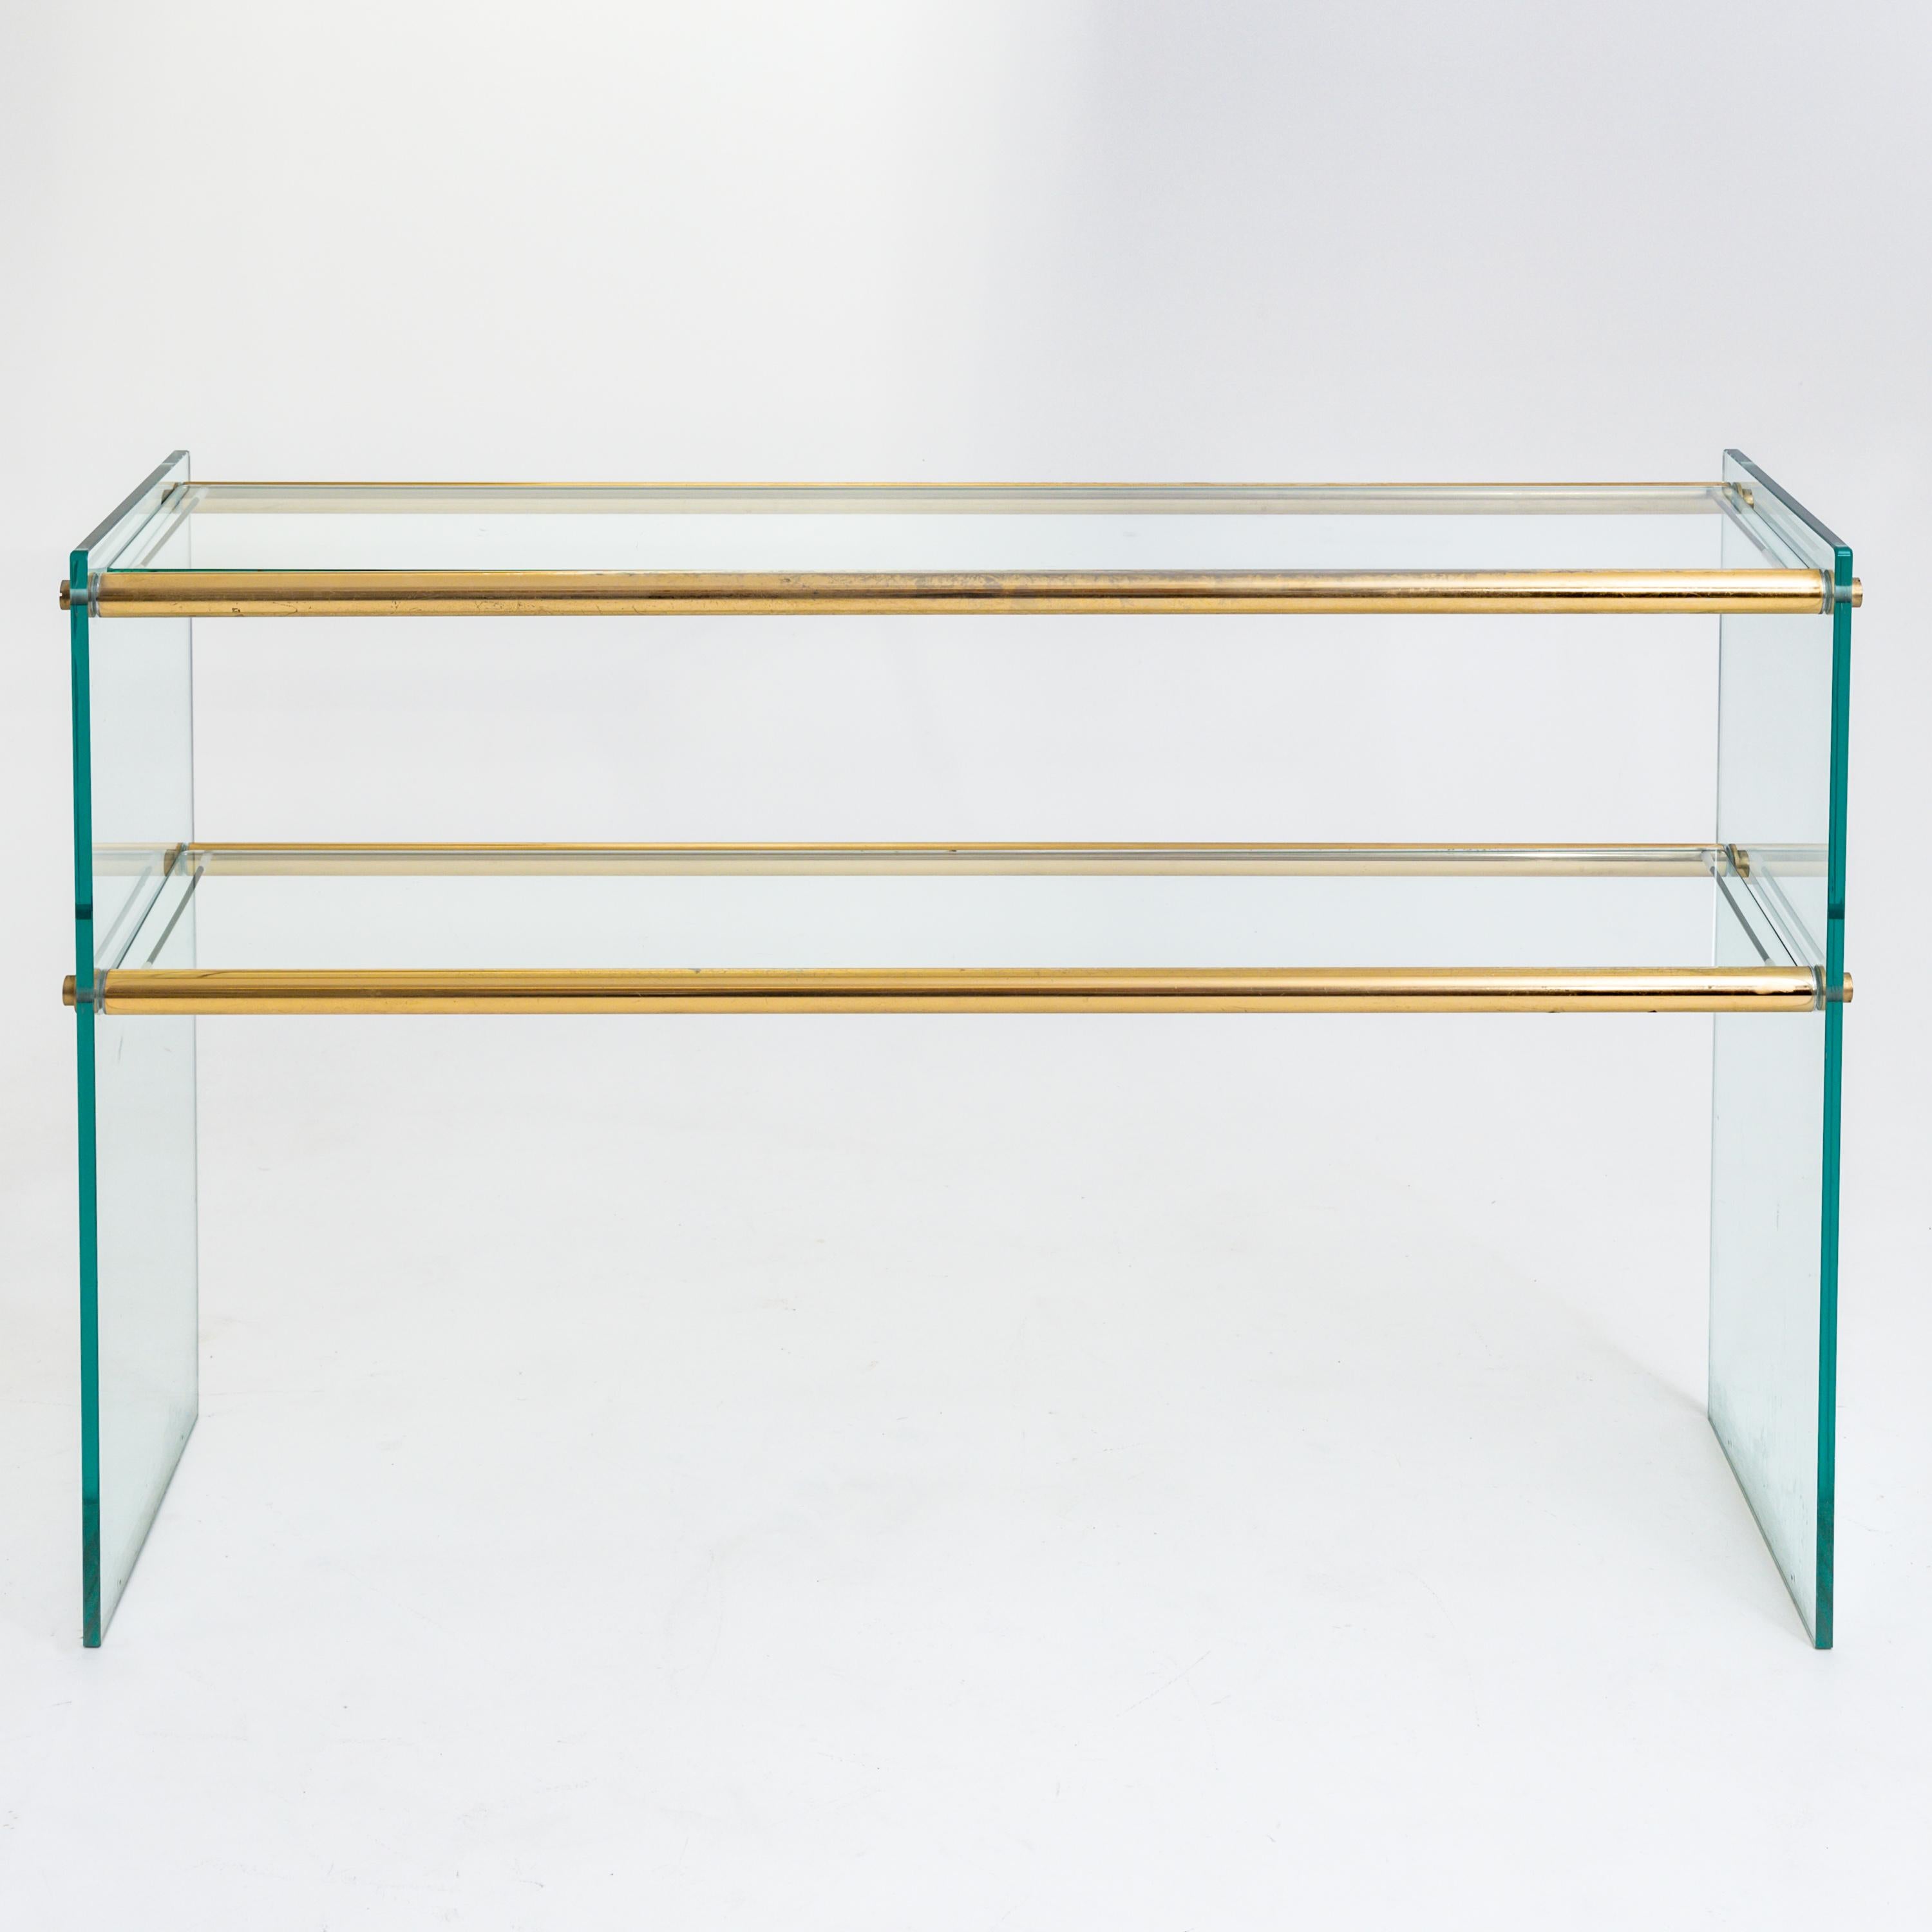 Console table by Gallotti e Radice made of glass panels with two shelves and brass-plated metal struts.